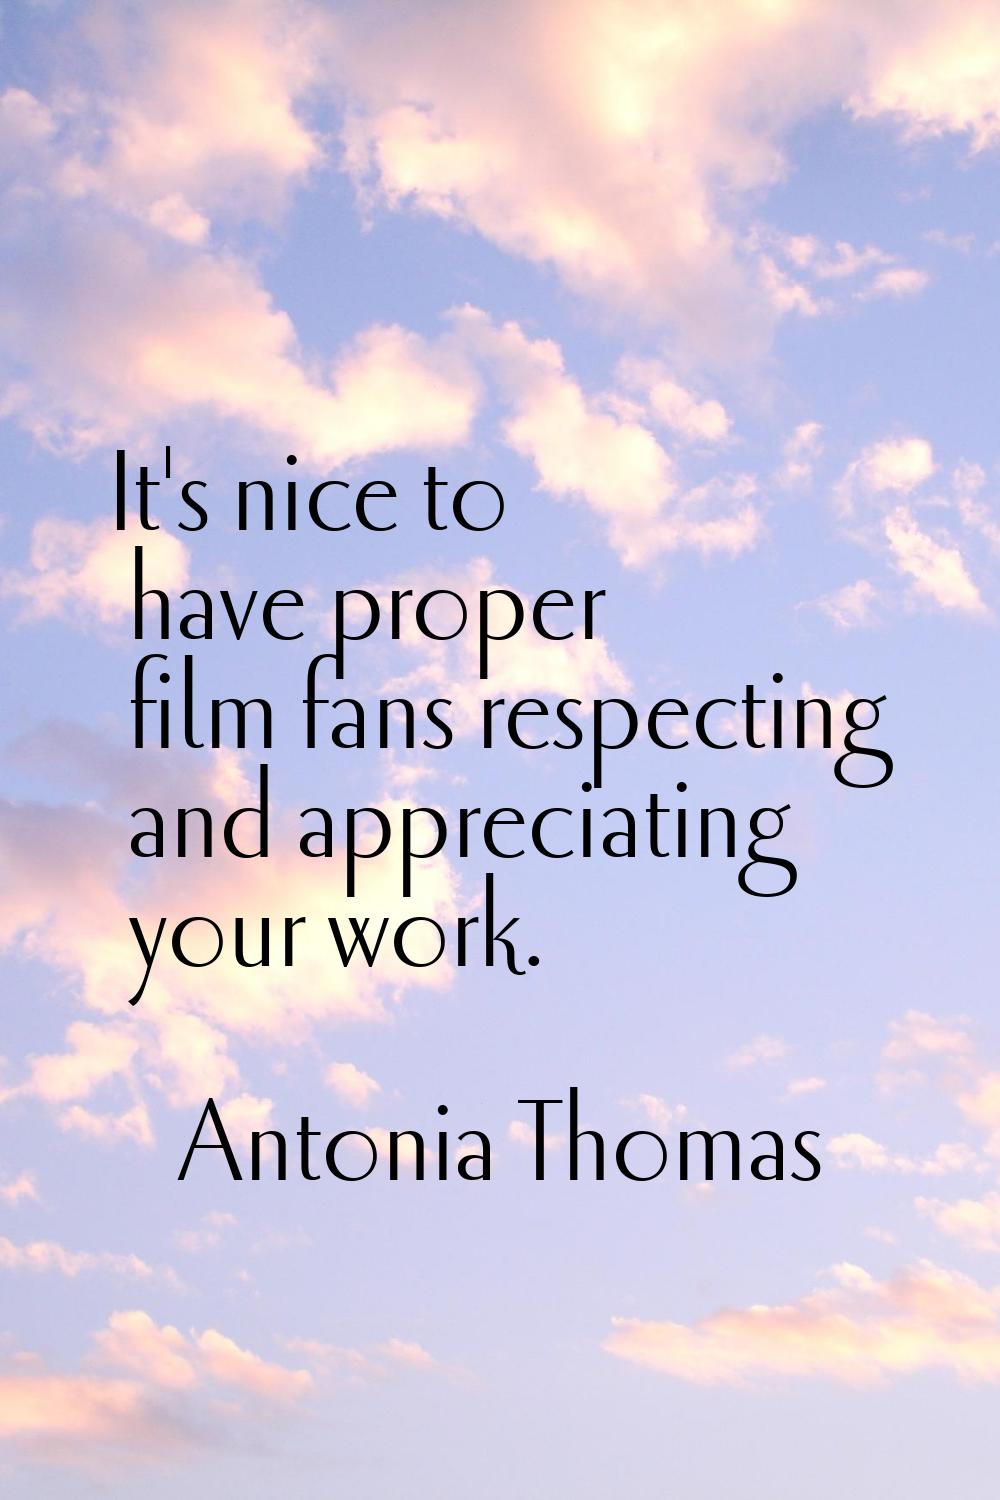 It's nice to have proper film fans respecting and appreciating your work.